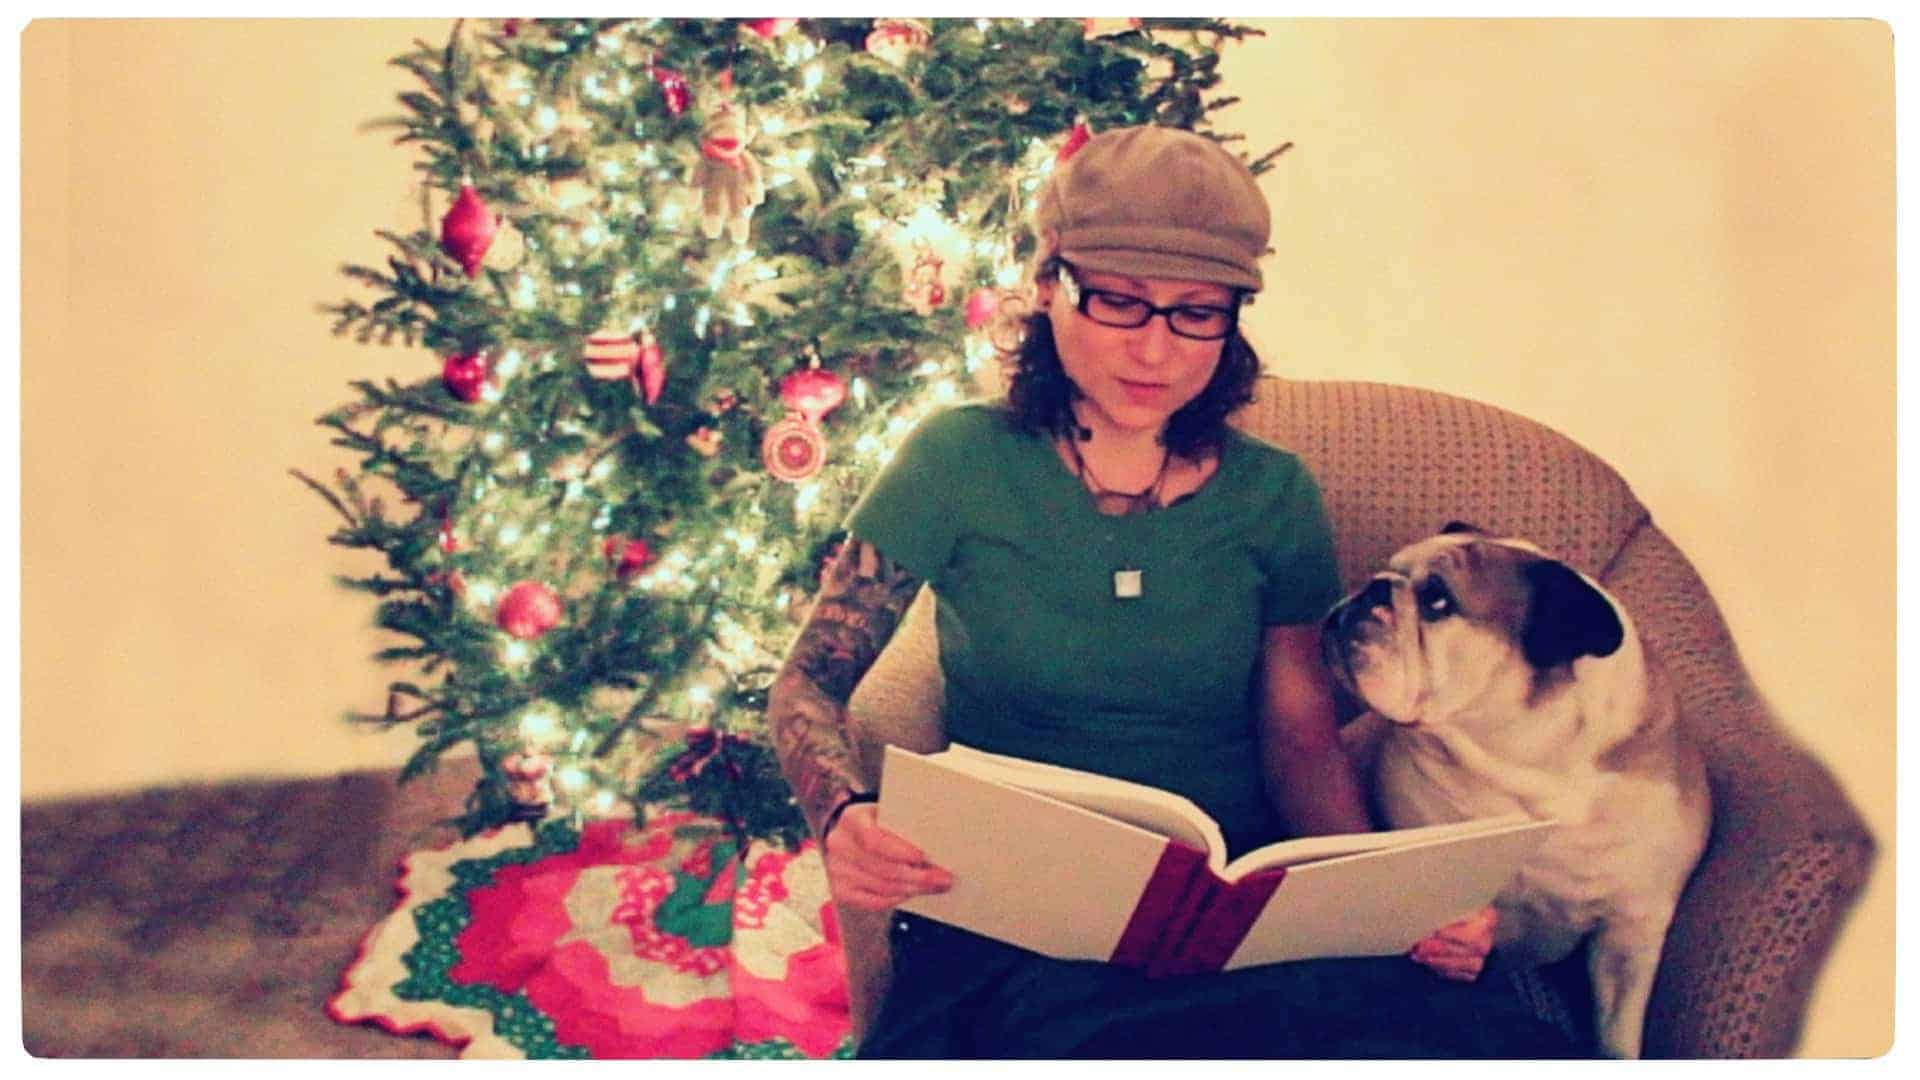 Emily Moran Barwick of Bite Size Vegan is shown sitting in a chair with her beloved bulldog, Ooby at her side and looking up at her. Emily is reading from a large book. Behind the tree is a fully decorated festive tree.